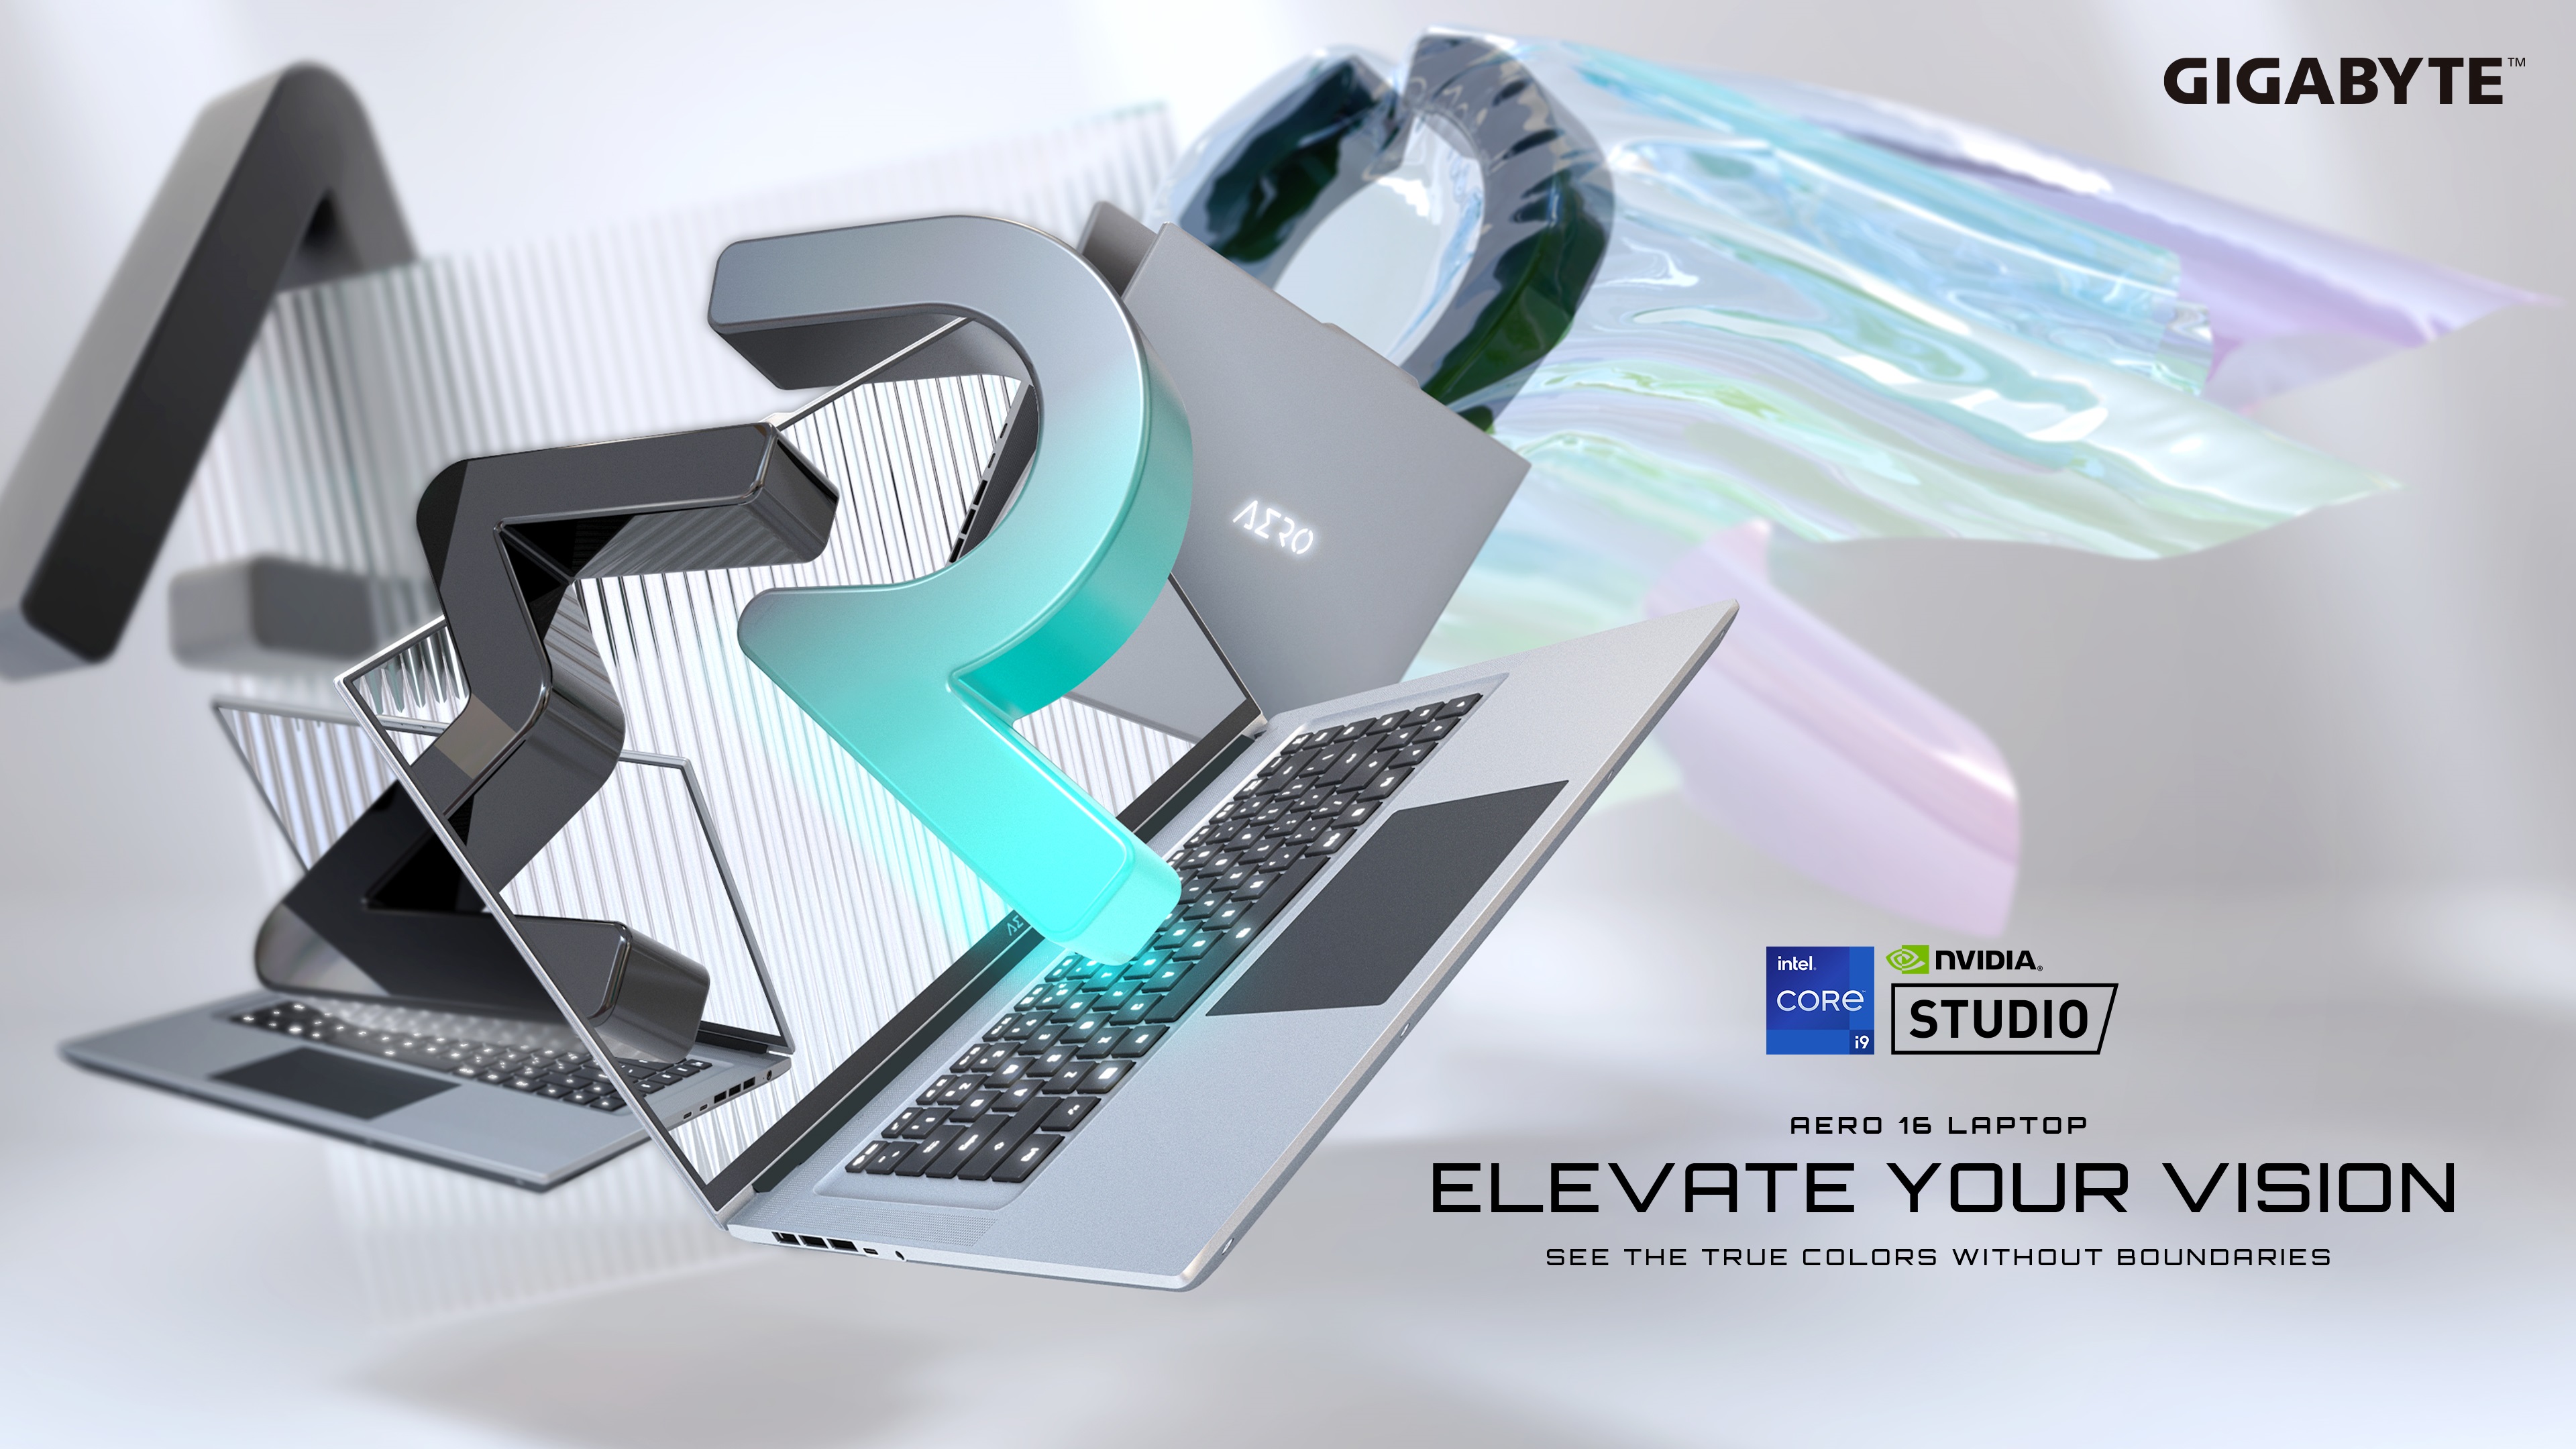 Elevate Your Vision: GIGABYTE Releases the 4K+ Creator Series Laptop